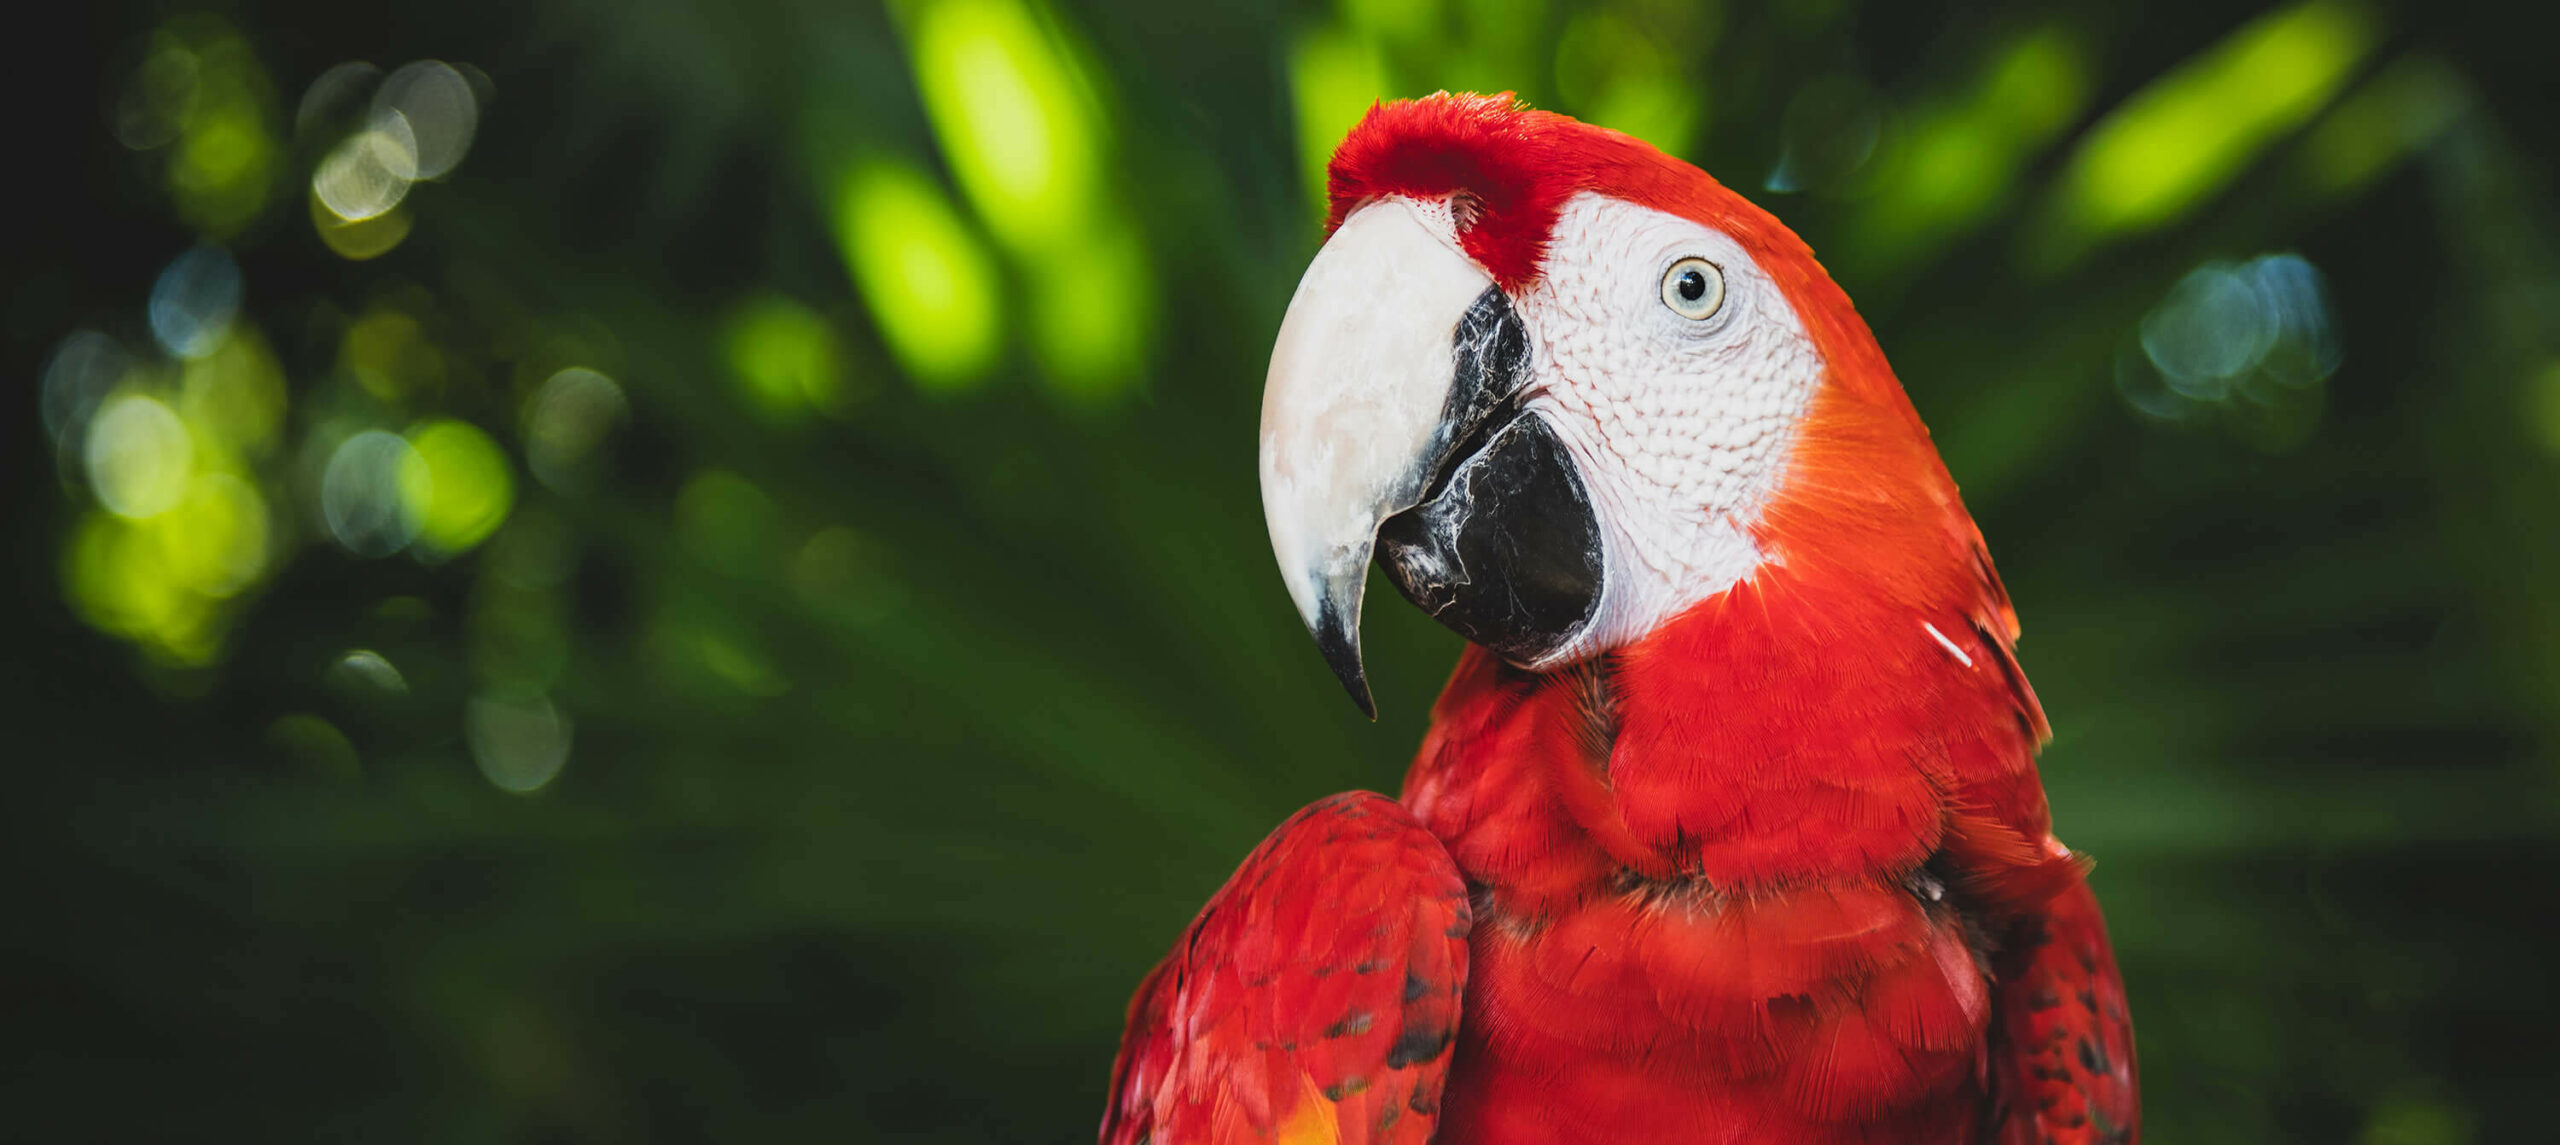 Bright red Macaw parrot